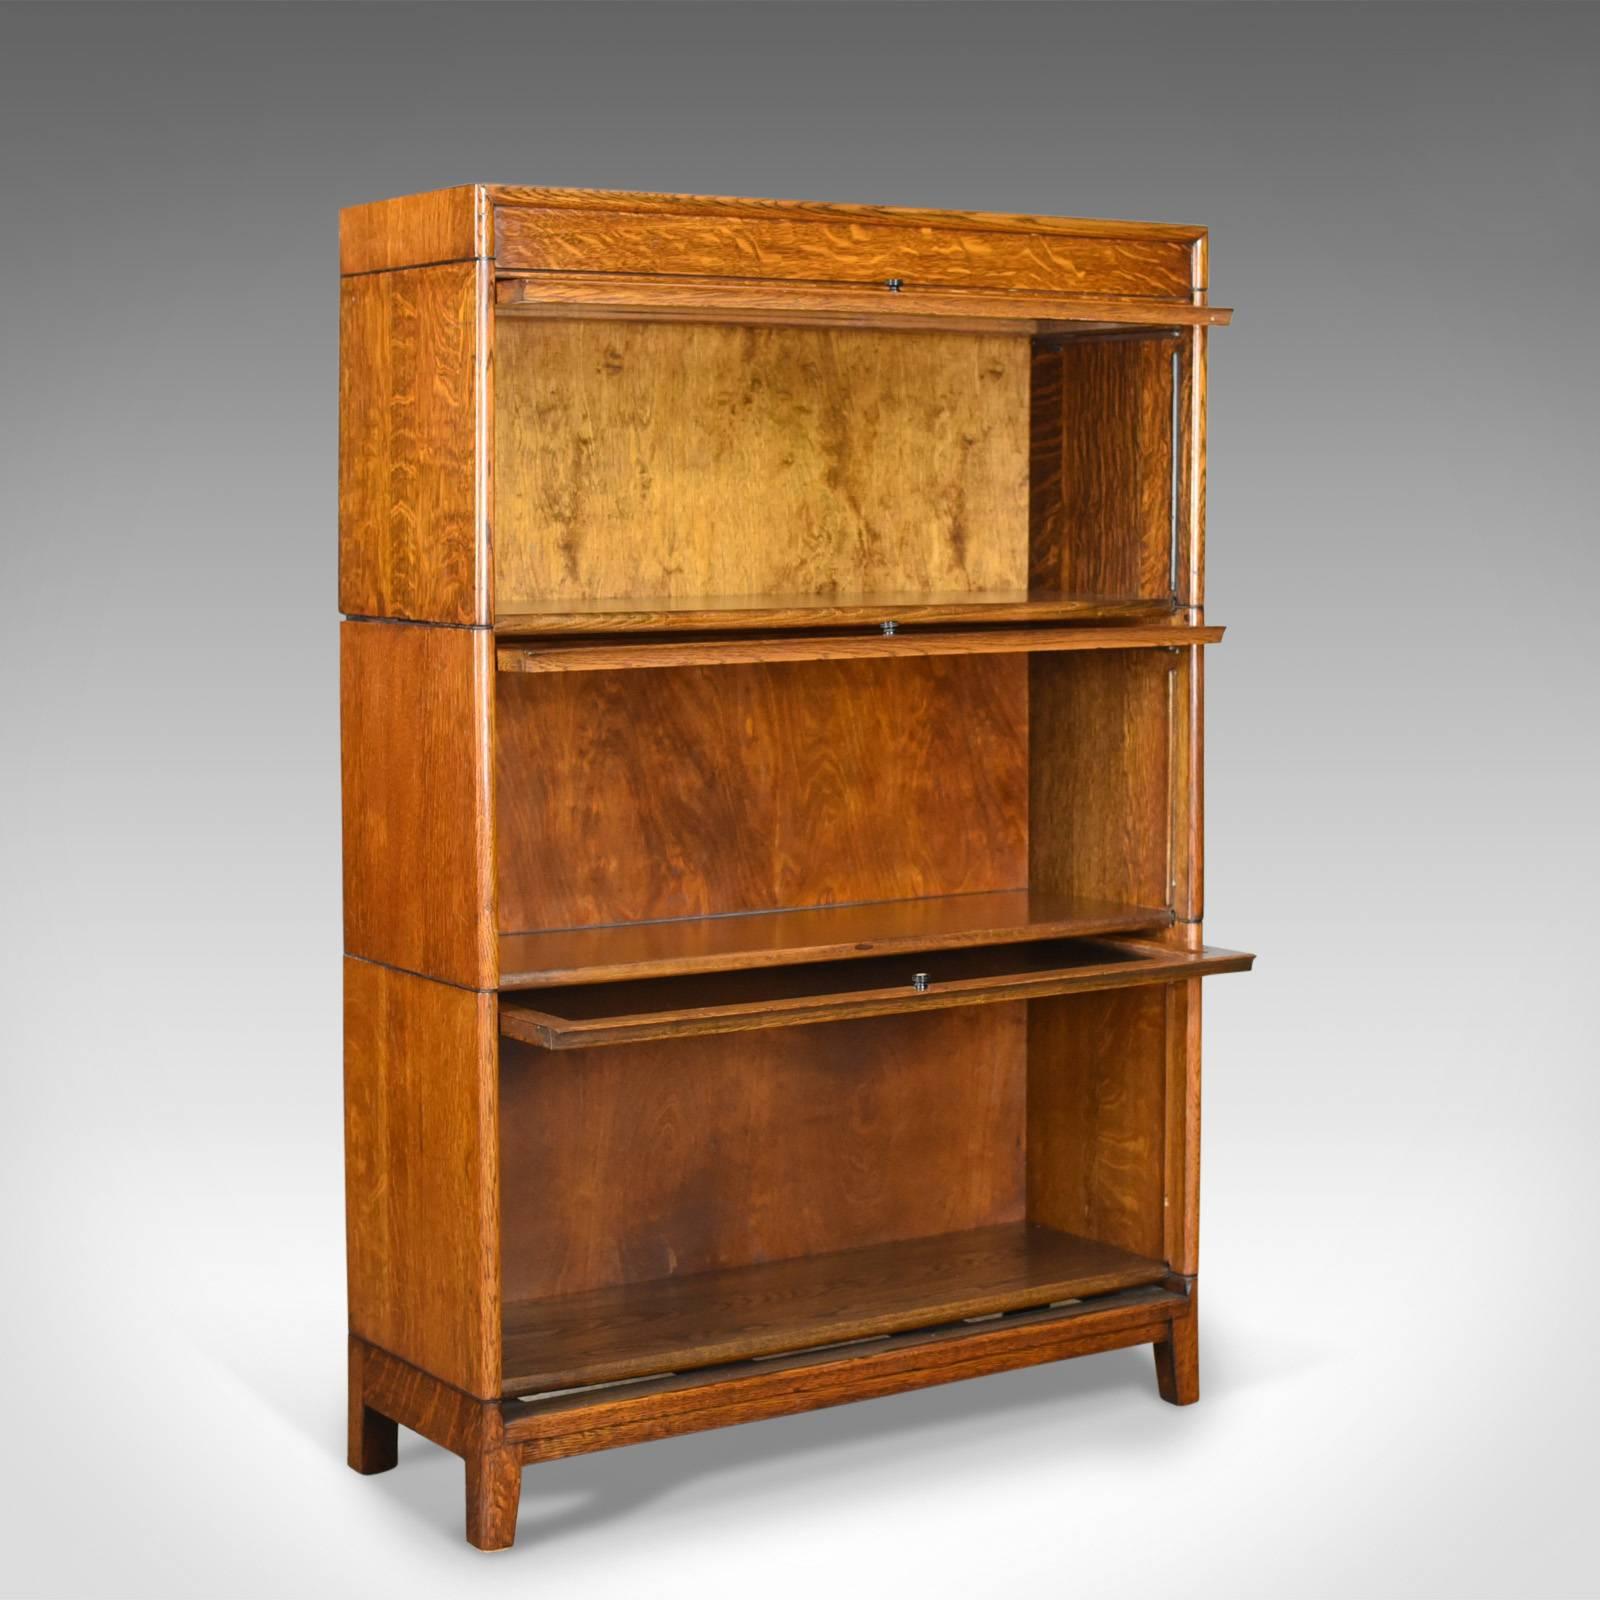 This is an antique bookcase, a three section, glazed, Globe Wernicke taste barrister's book shelf in English oak dating to the Edwardian era, circa 1910.

Oak with delicious honey tones in a wax polished finish
Grain interest throughout